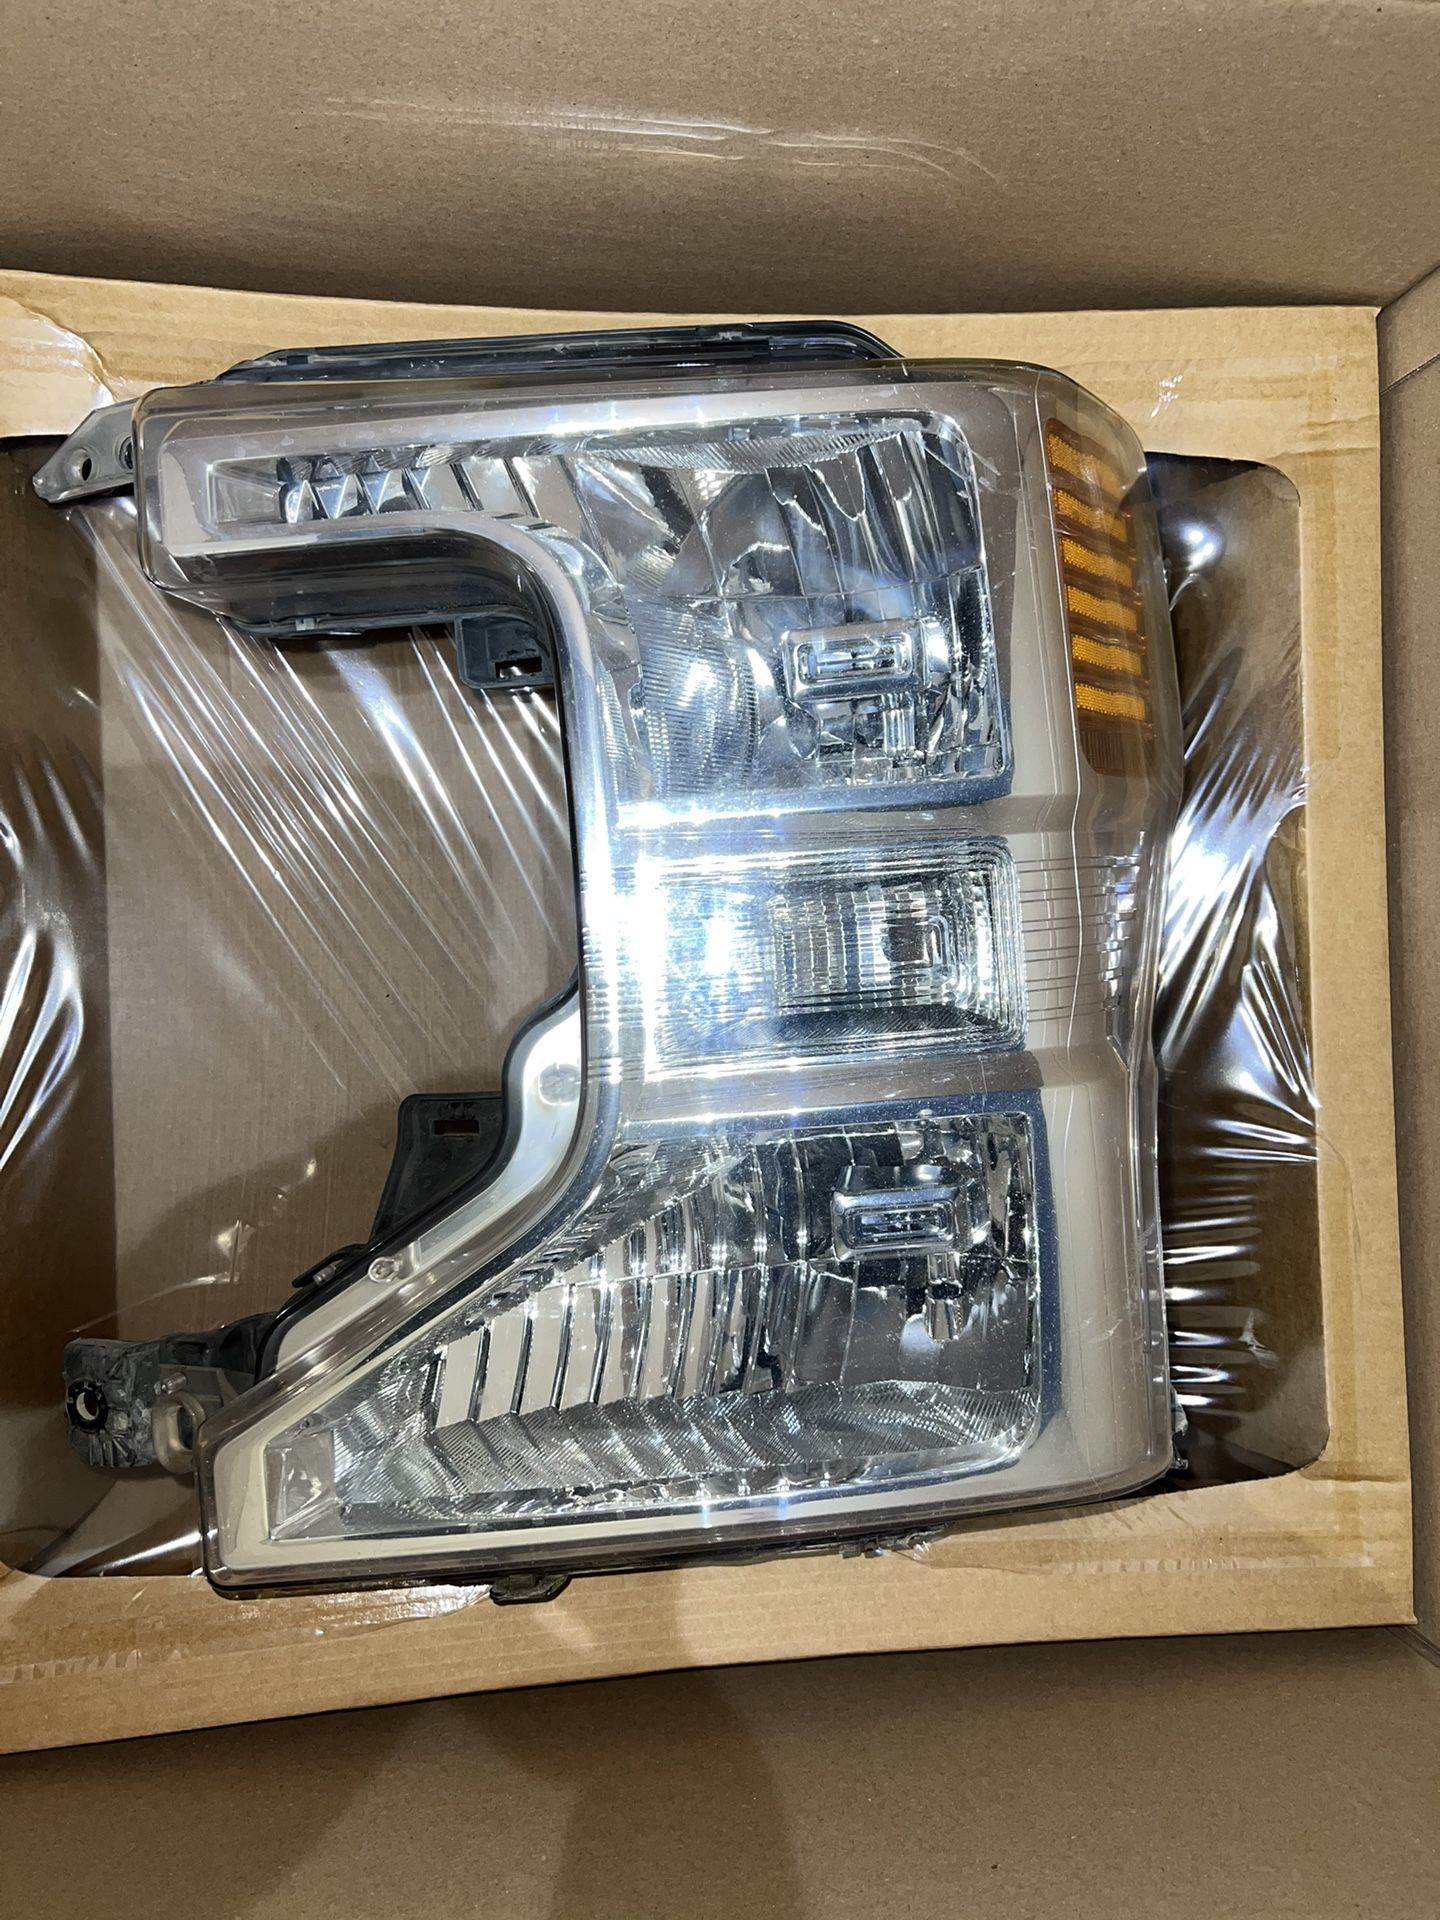 2020 F250 Left Hand Side Headlight Assembly. Has one tab missing on bottom corner and has a crack Pictures taken of damage 